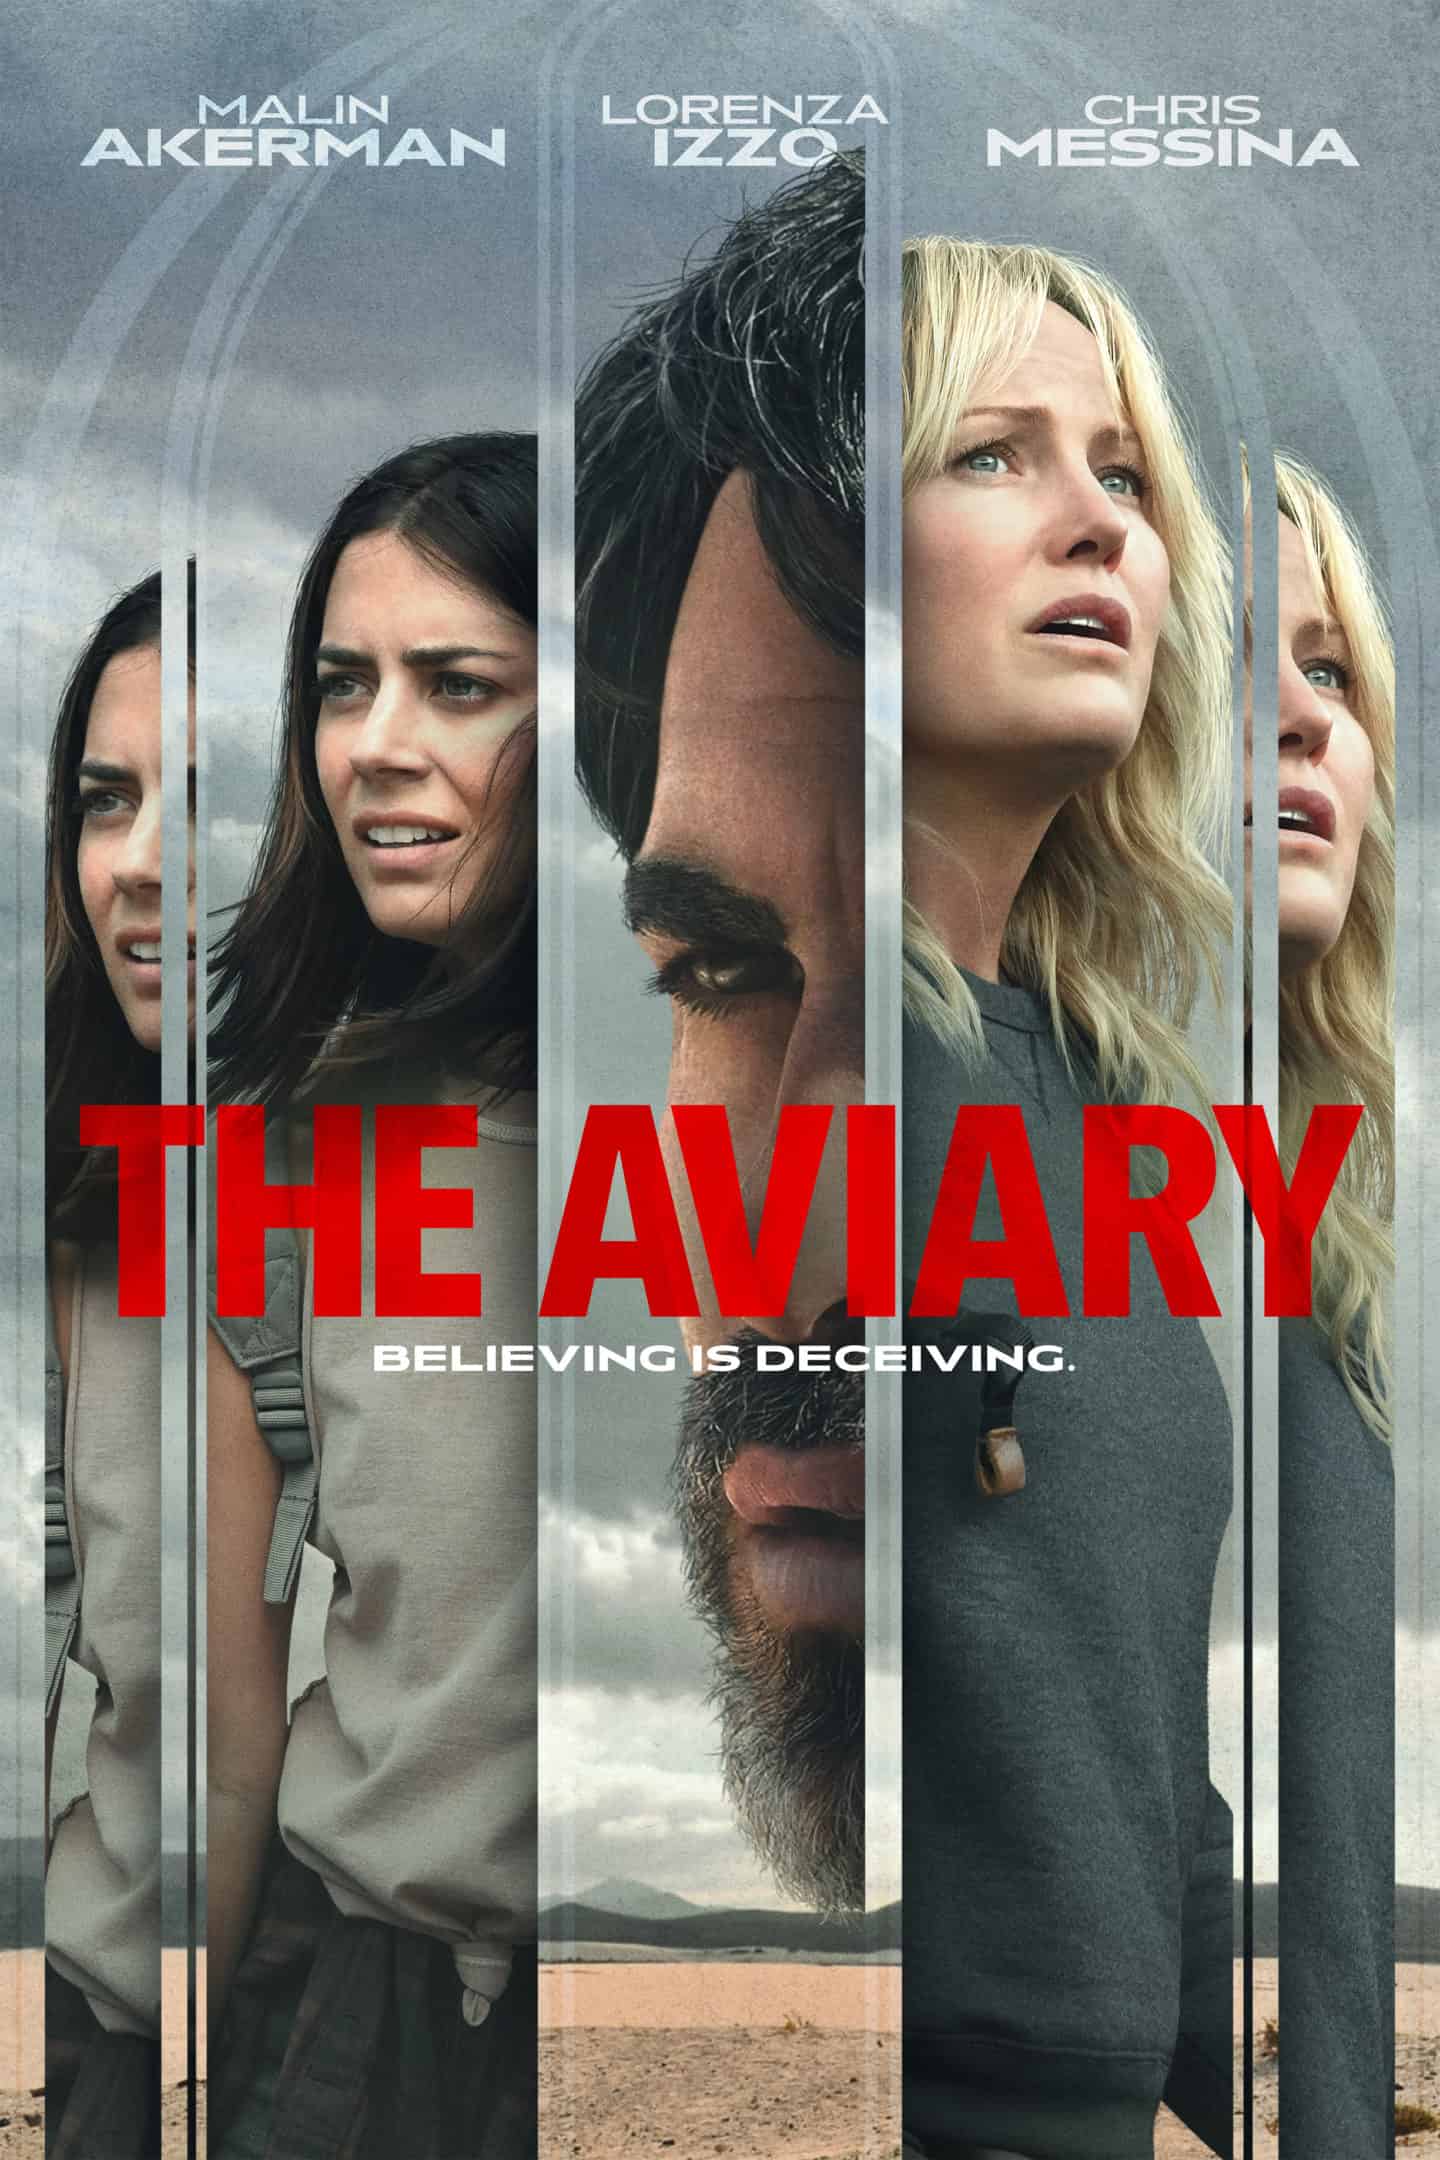 The Aviary comes to Digital and On Demand on April 29th 1